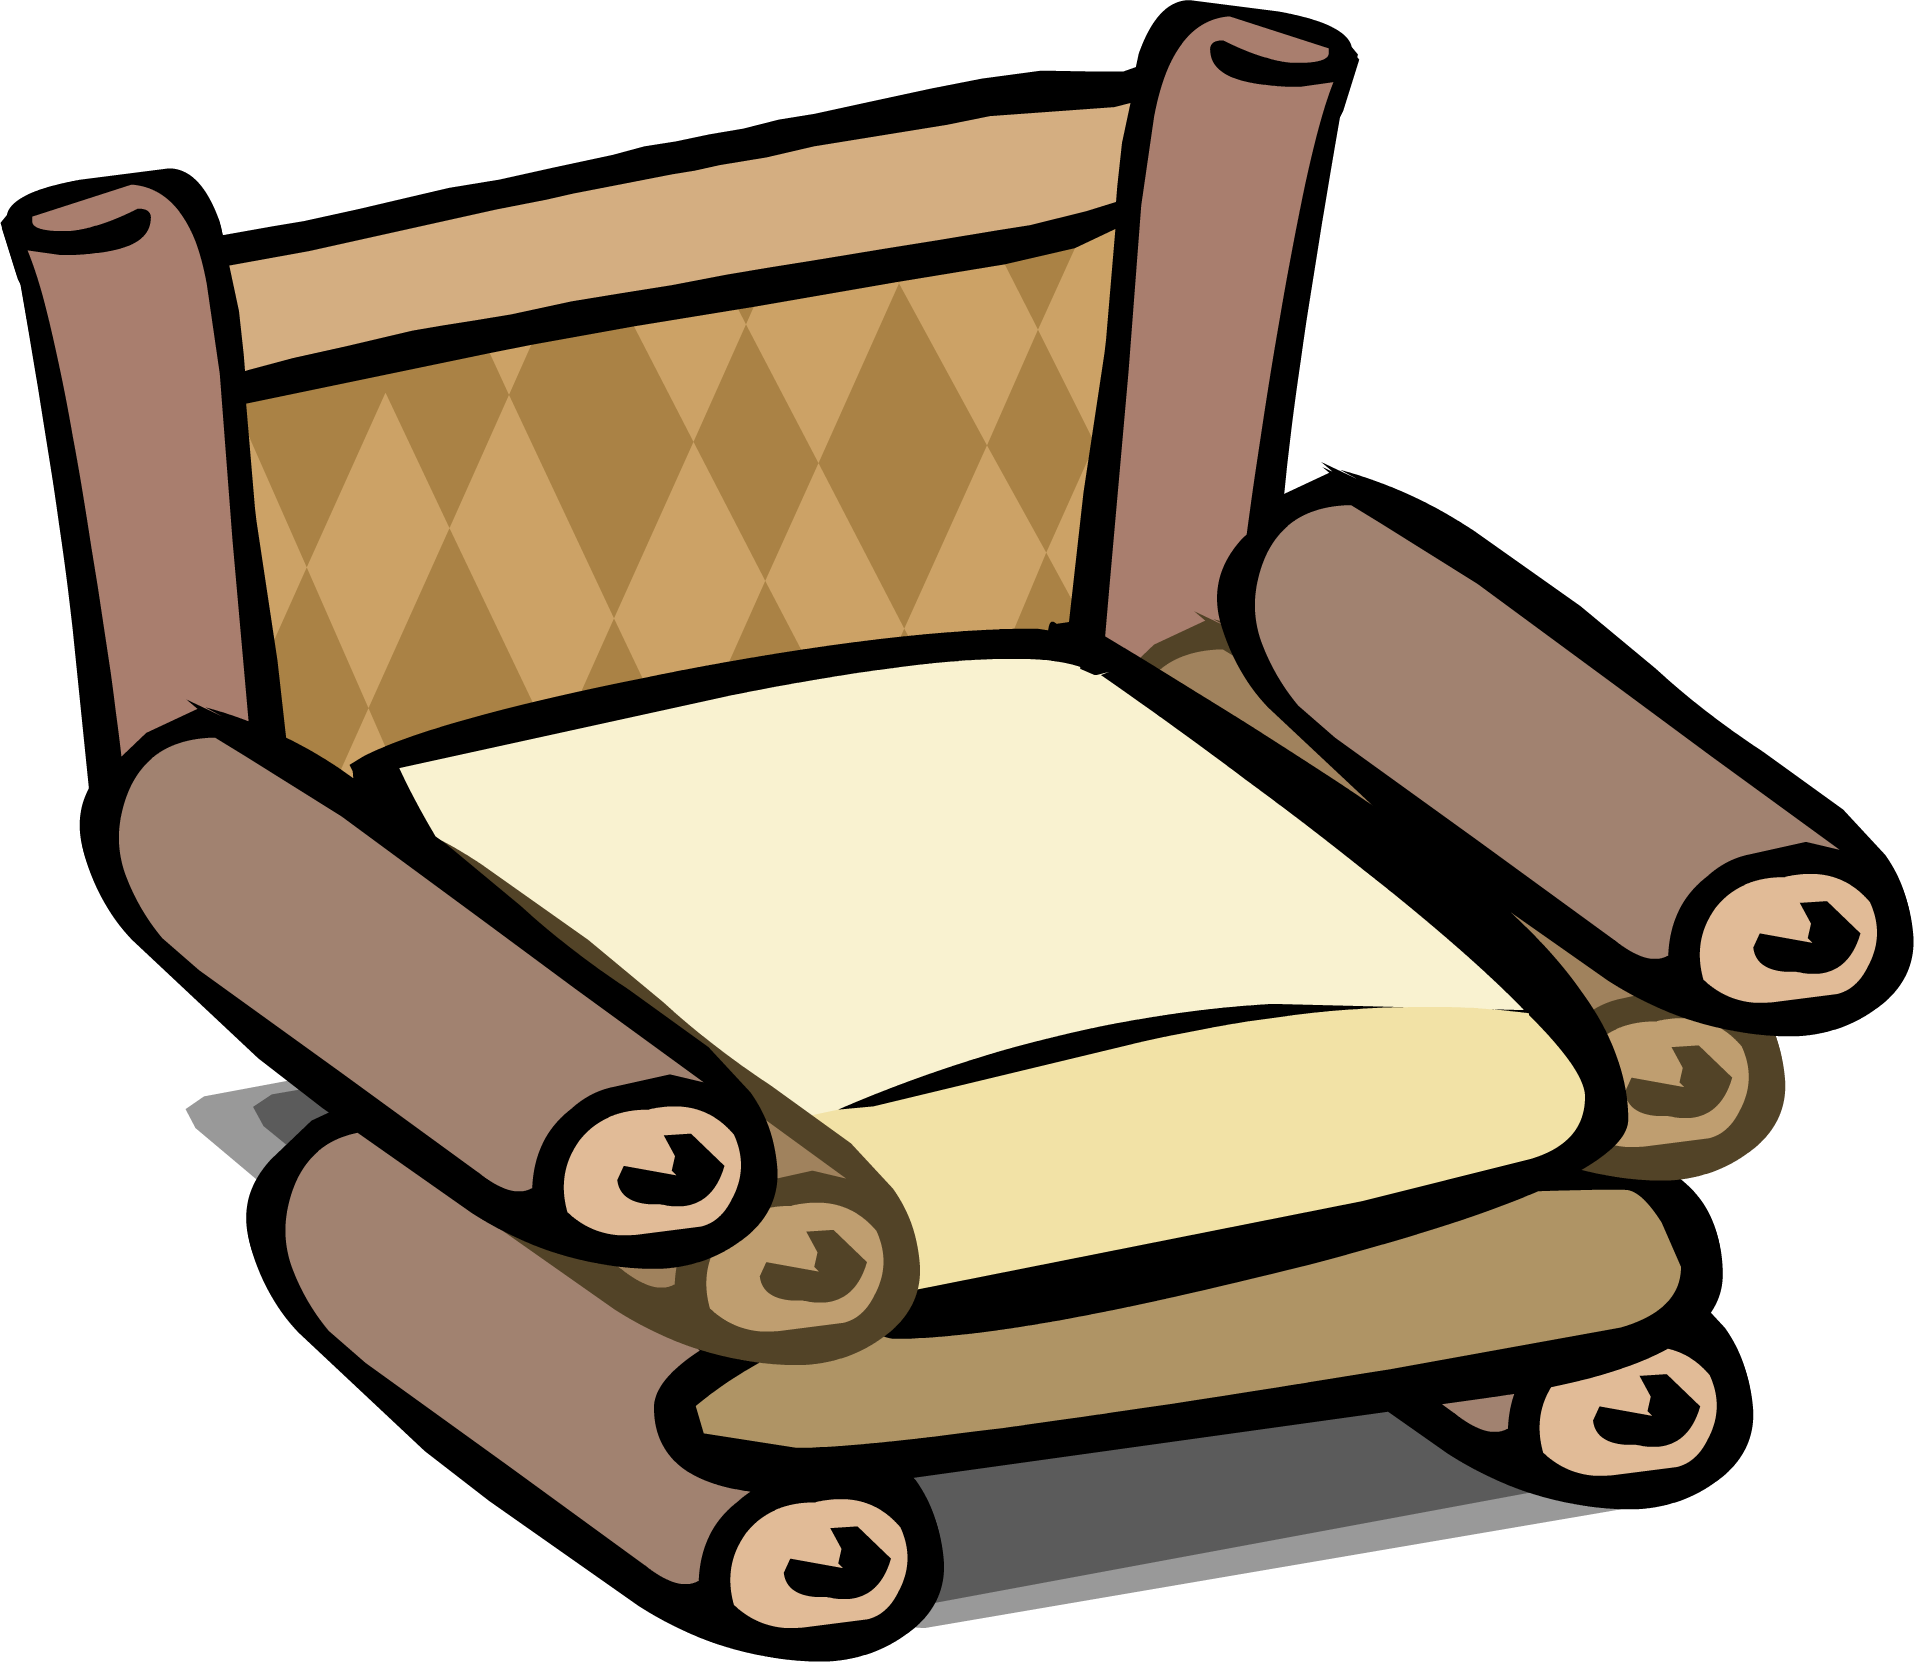 Image sprite png club. Clipart chair bamboo chair